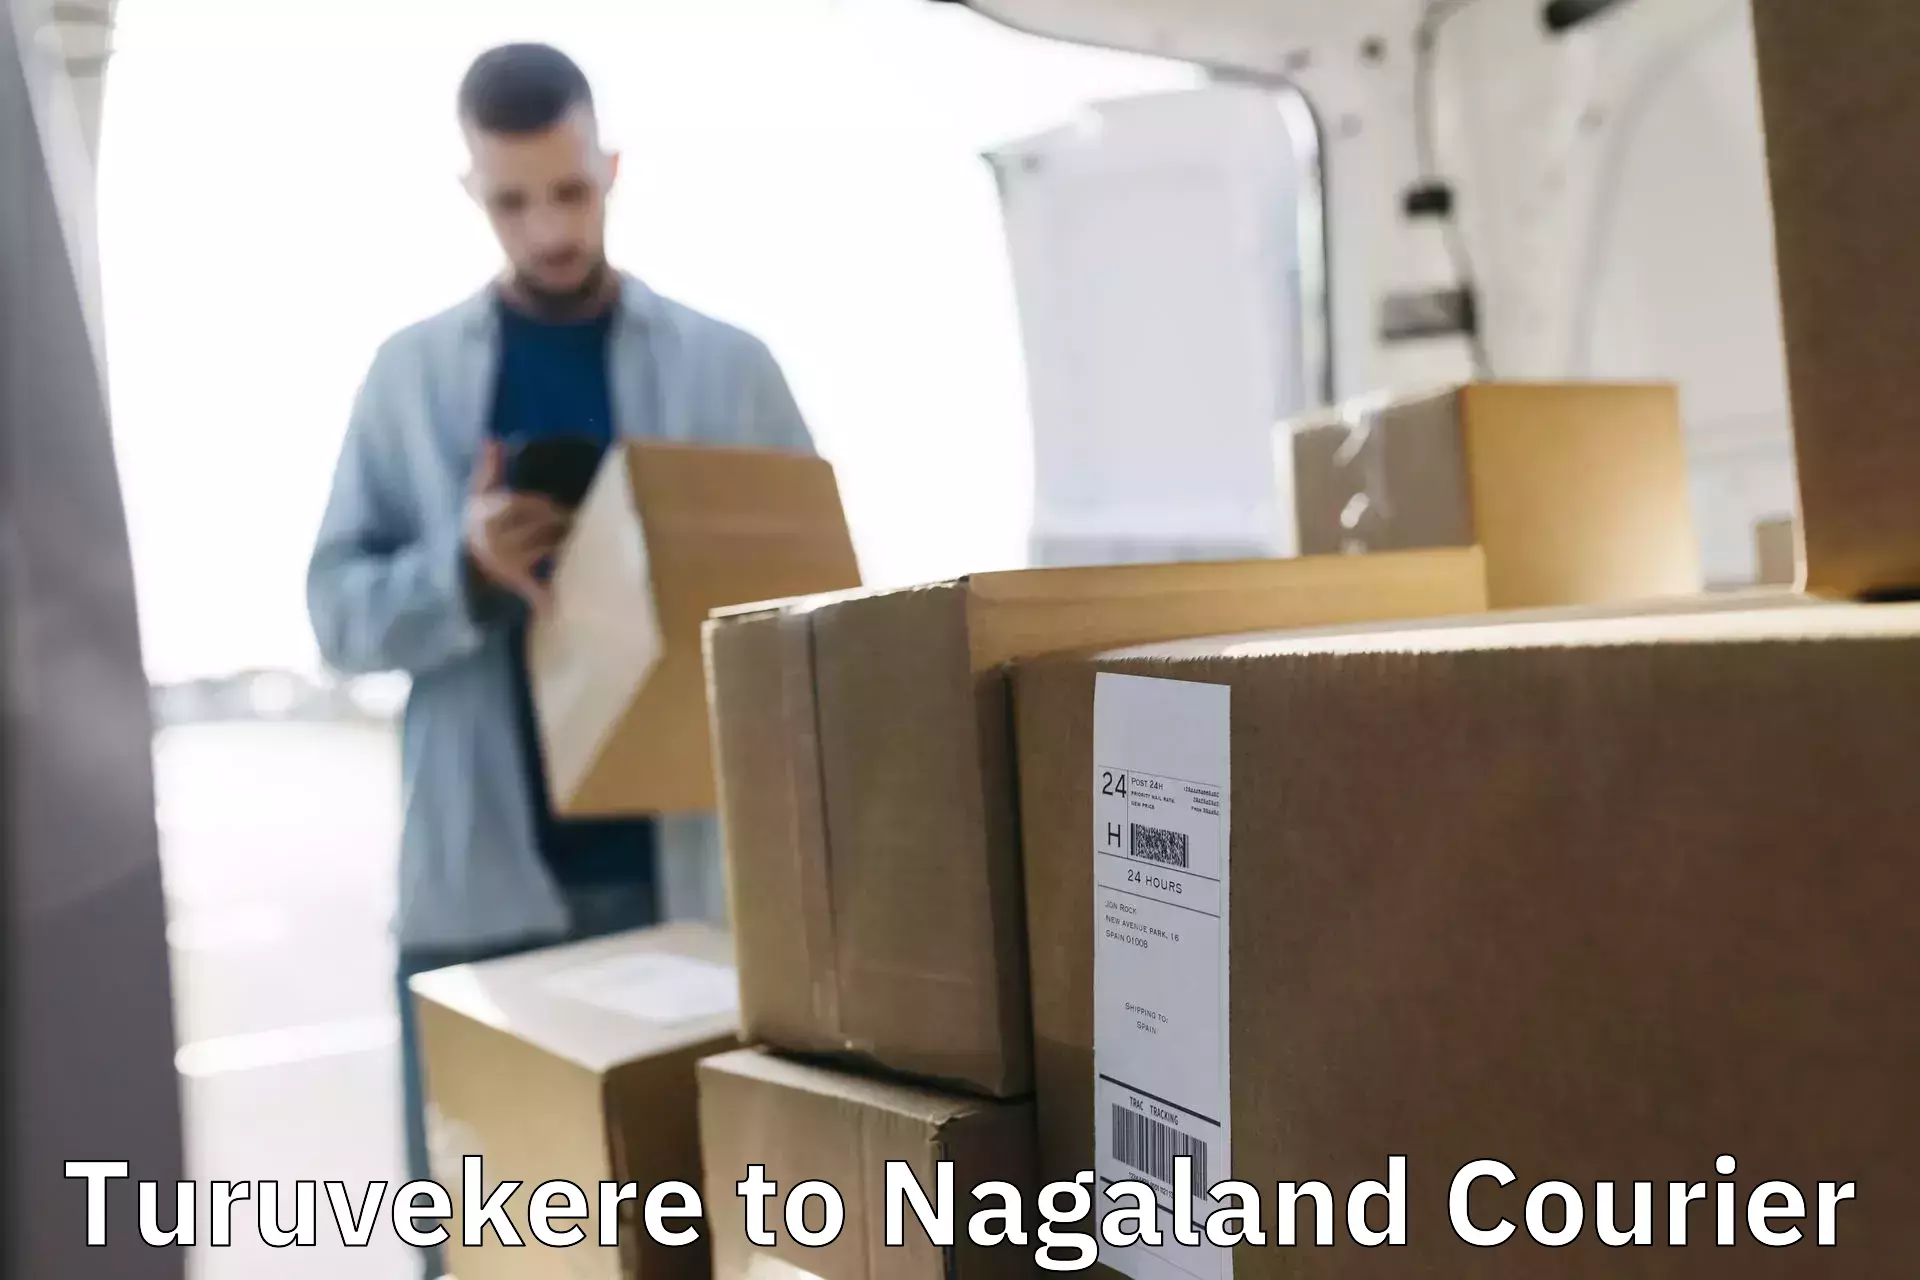 Personalized courier experiences Turuvekere to Nagaland